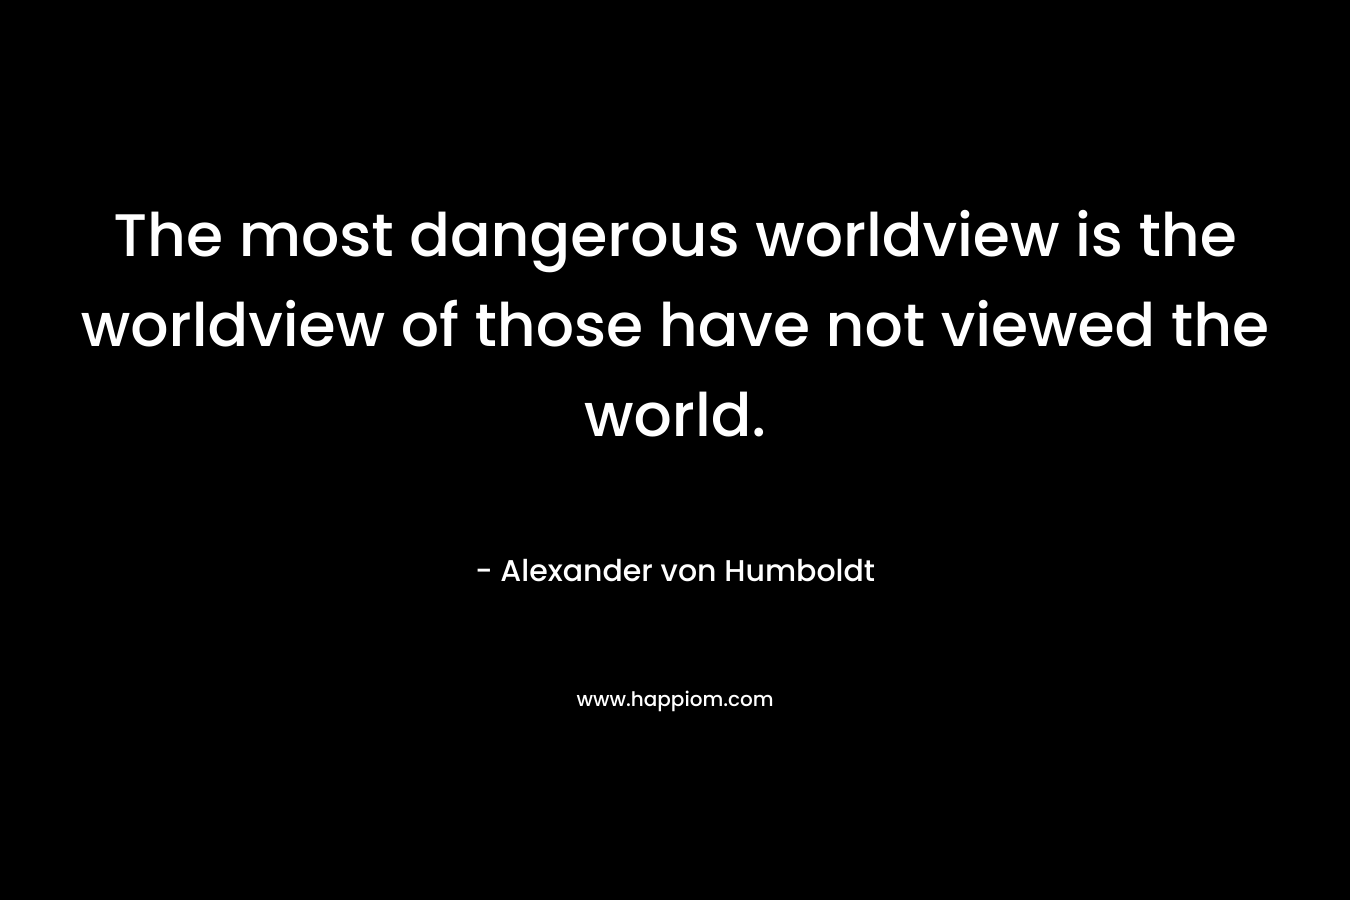 The most dangerous worldview is the worldview of those have not viewed the world.